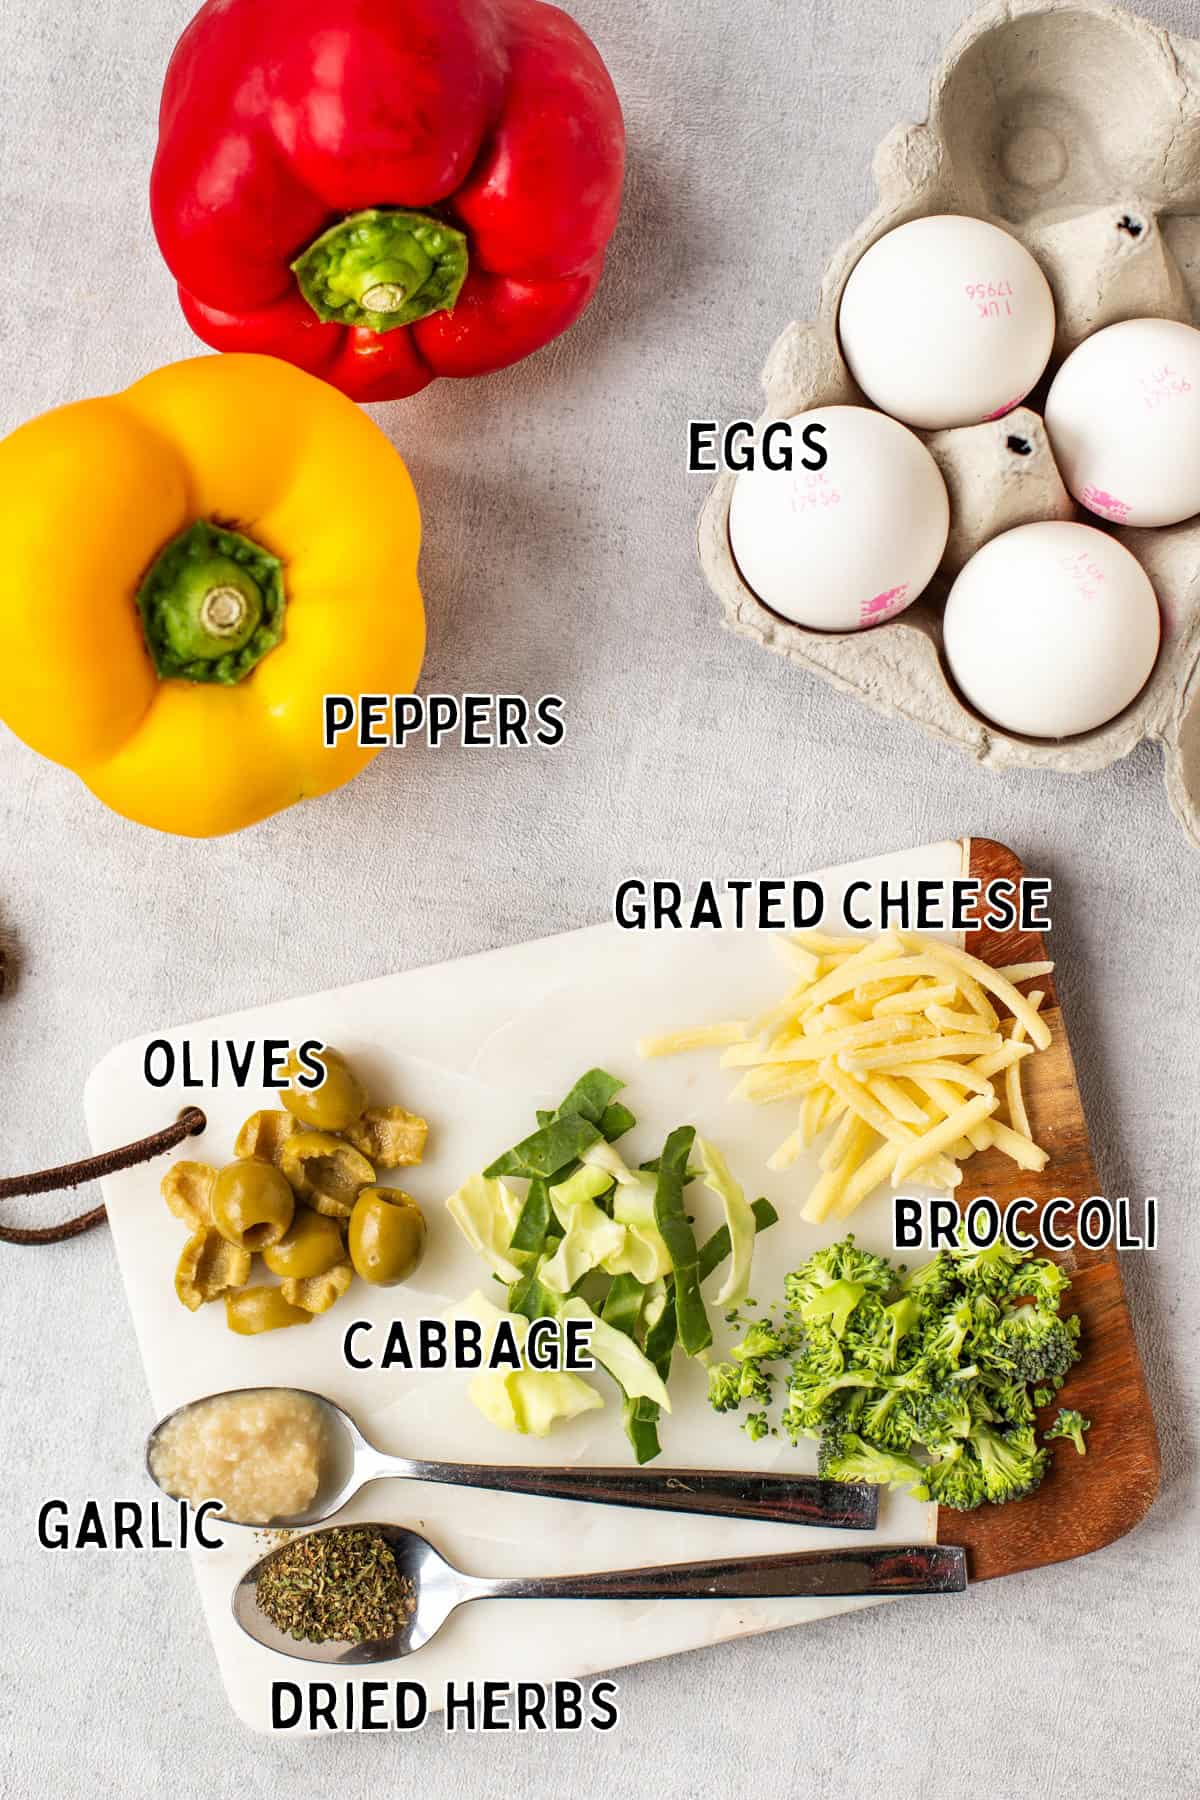 Ingredients for pepper fried eggs laid out with text overlay.